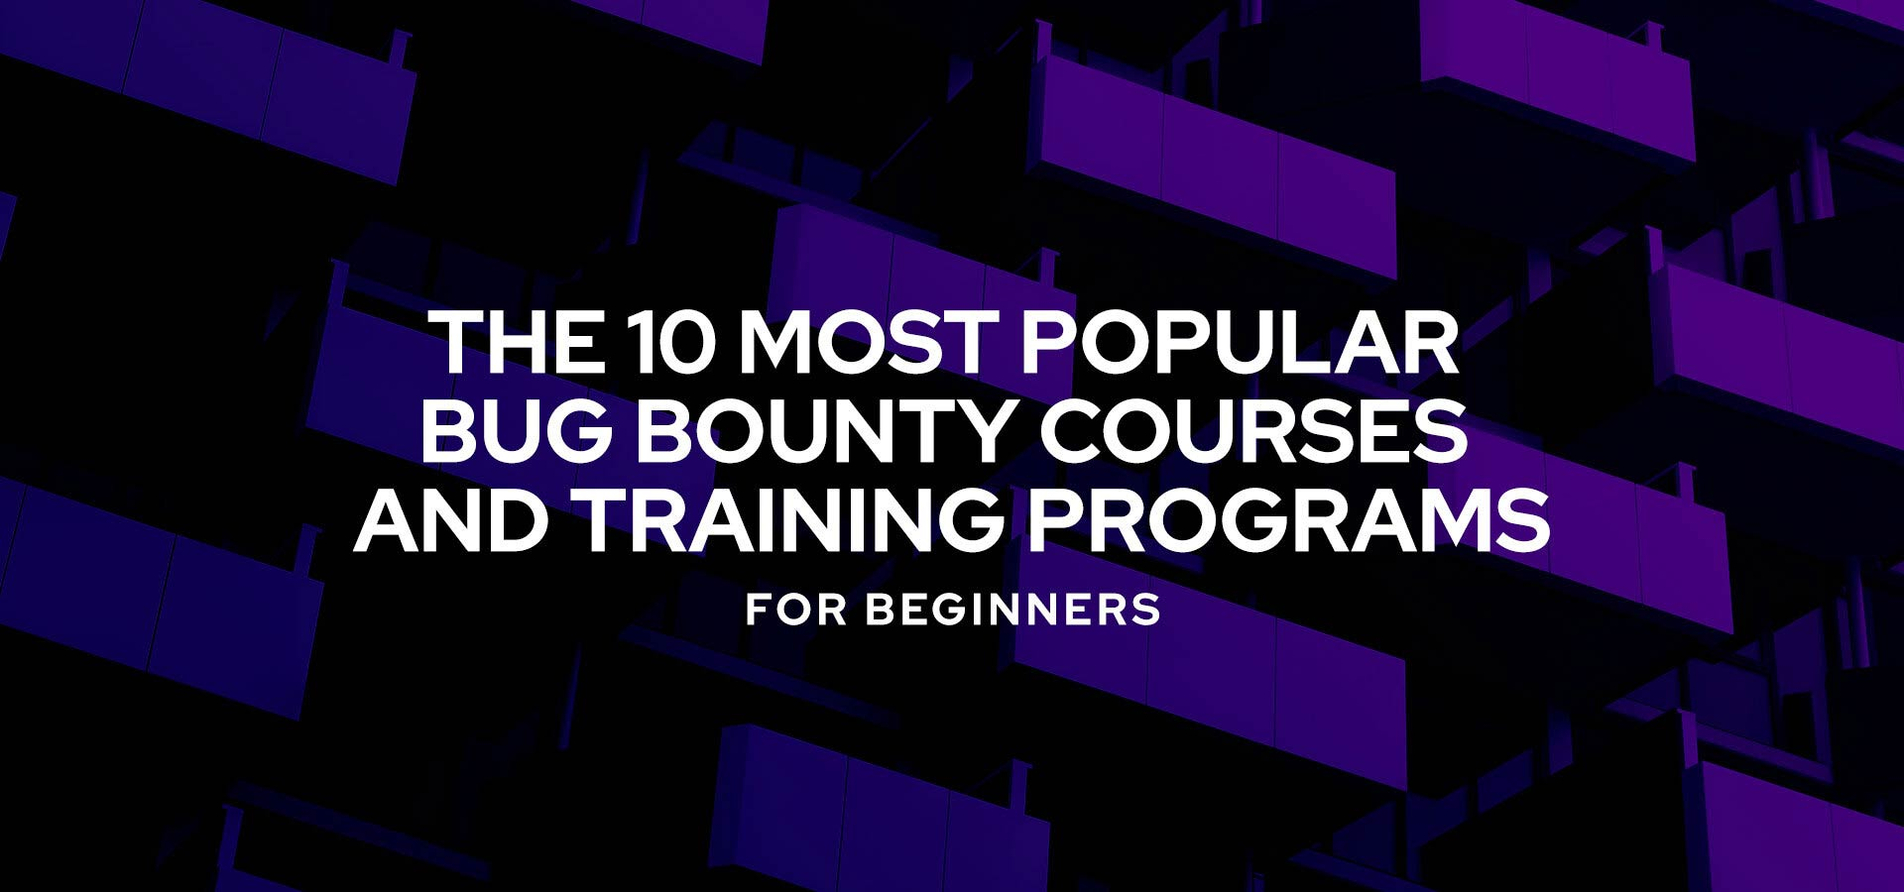 The 10 Most Popular Bug Bounty Courses and Training Programs for Beginners.